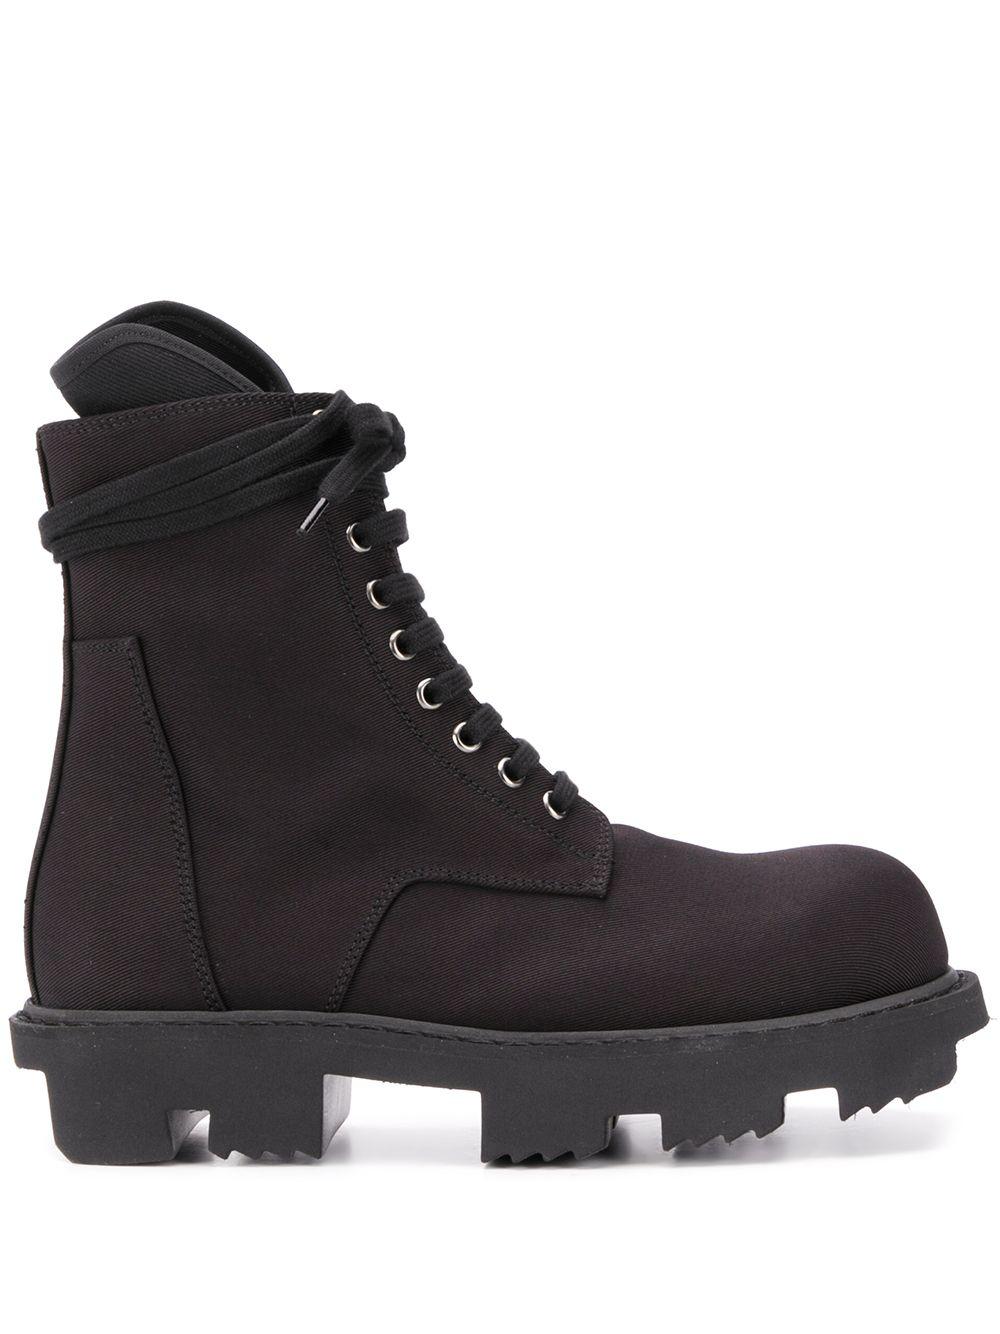 Rick Owens Bozo Megatooth Lace-up Canvas Boots in Black | Lyst